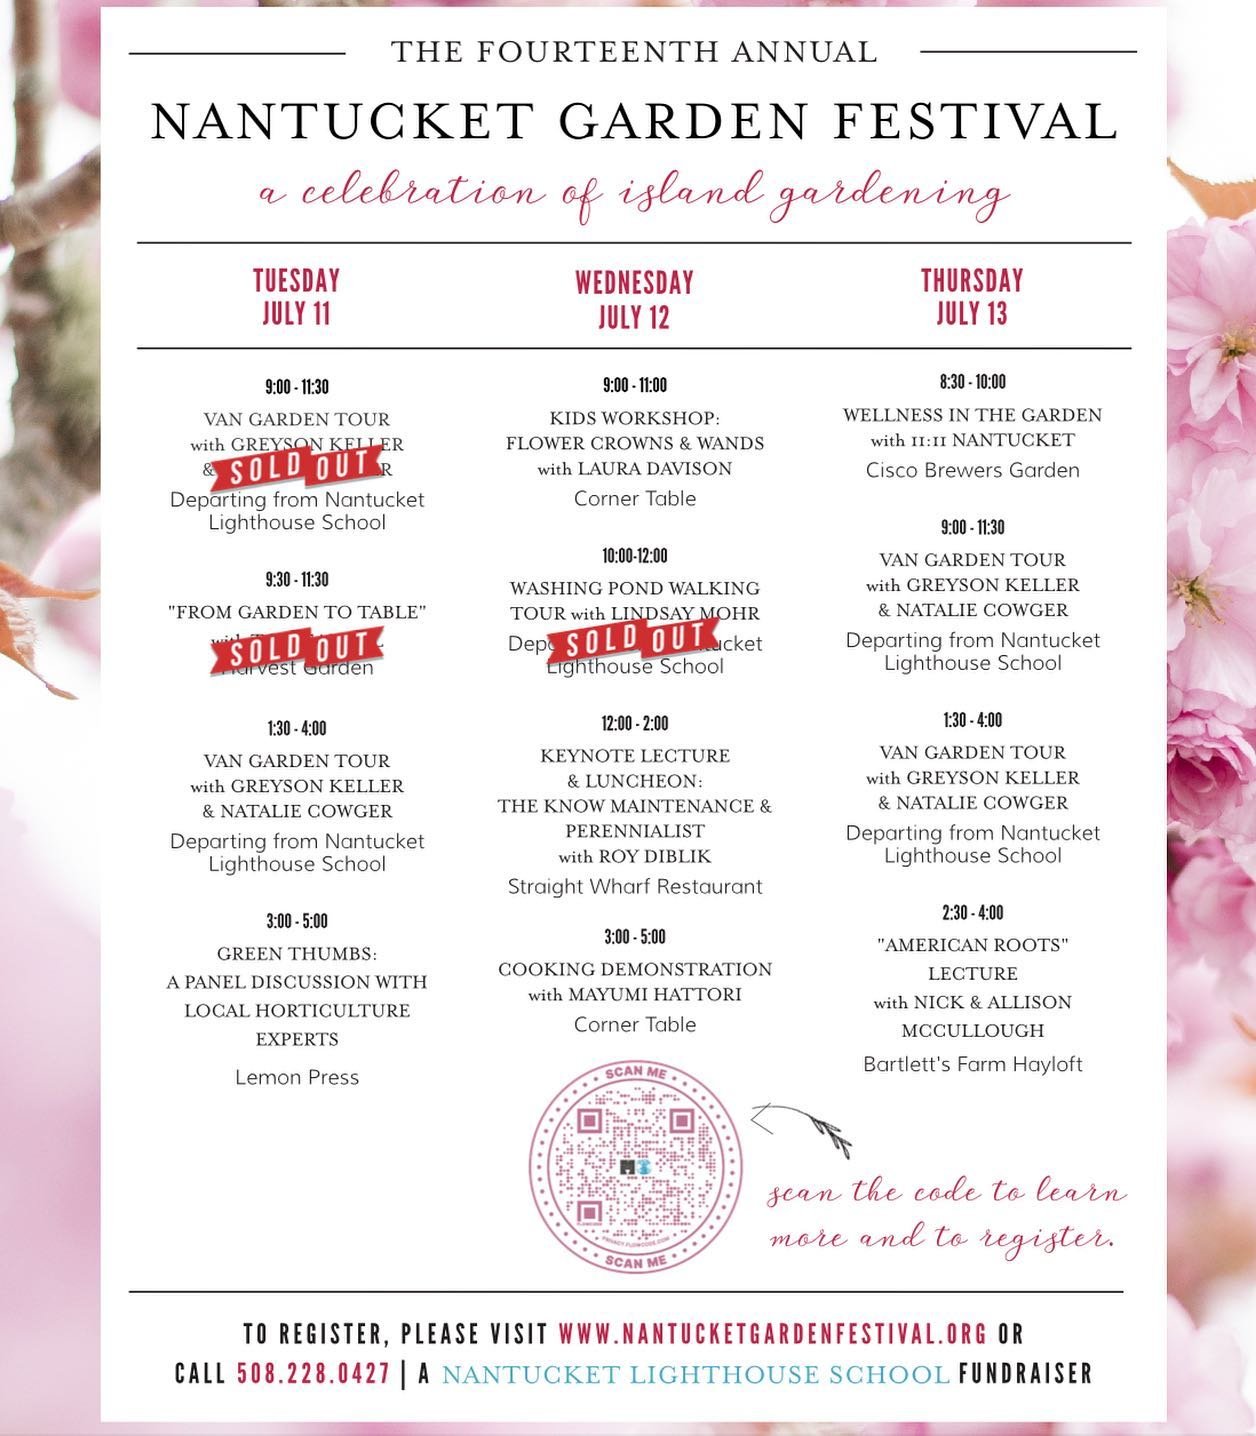 ✨Don&rsquo;t miss your opportunity to attend the fourteenth annual Nantucket Garden Festival this summer.✨

Events are starting to sell out, so hop on over to our website (👉link in profile) to learn more about our inspiring line-up of events.

We ho